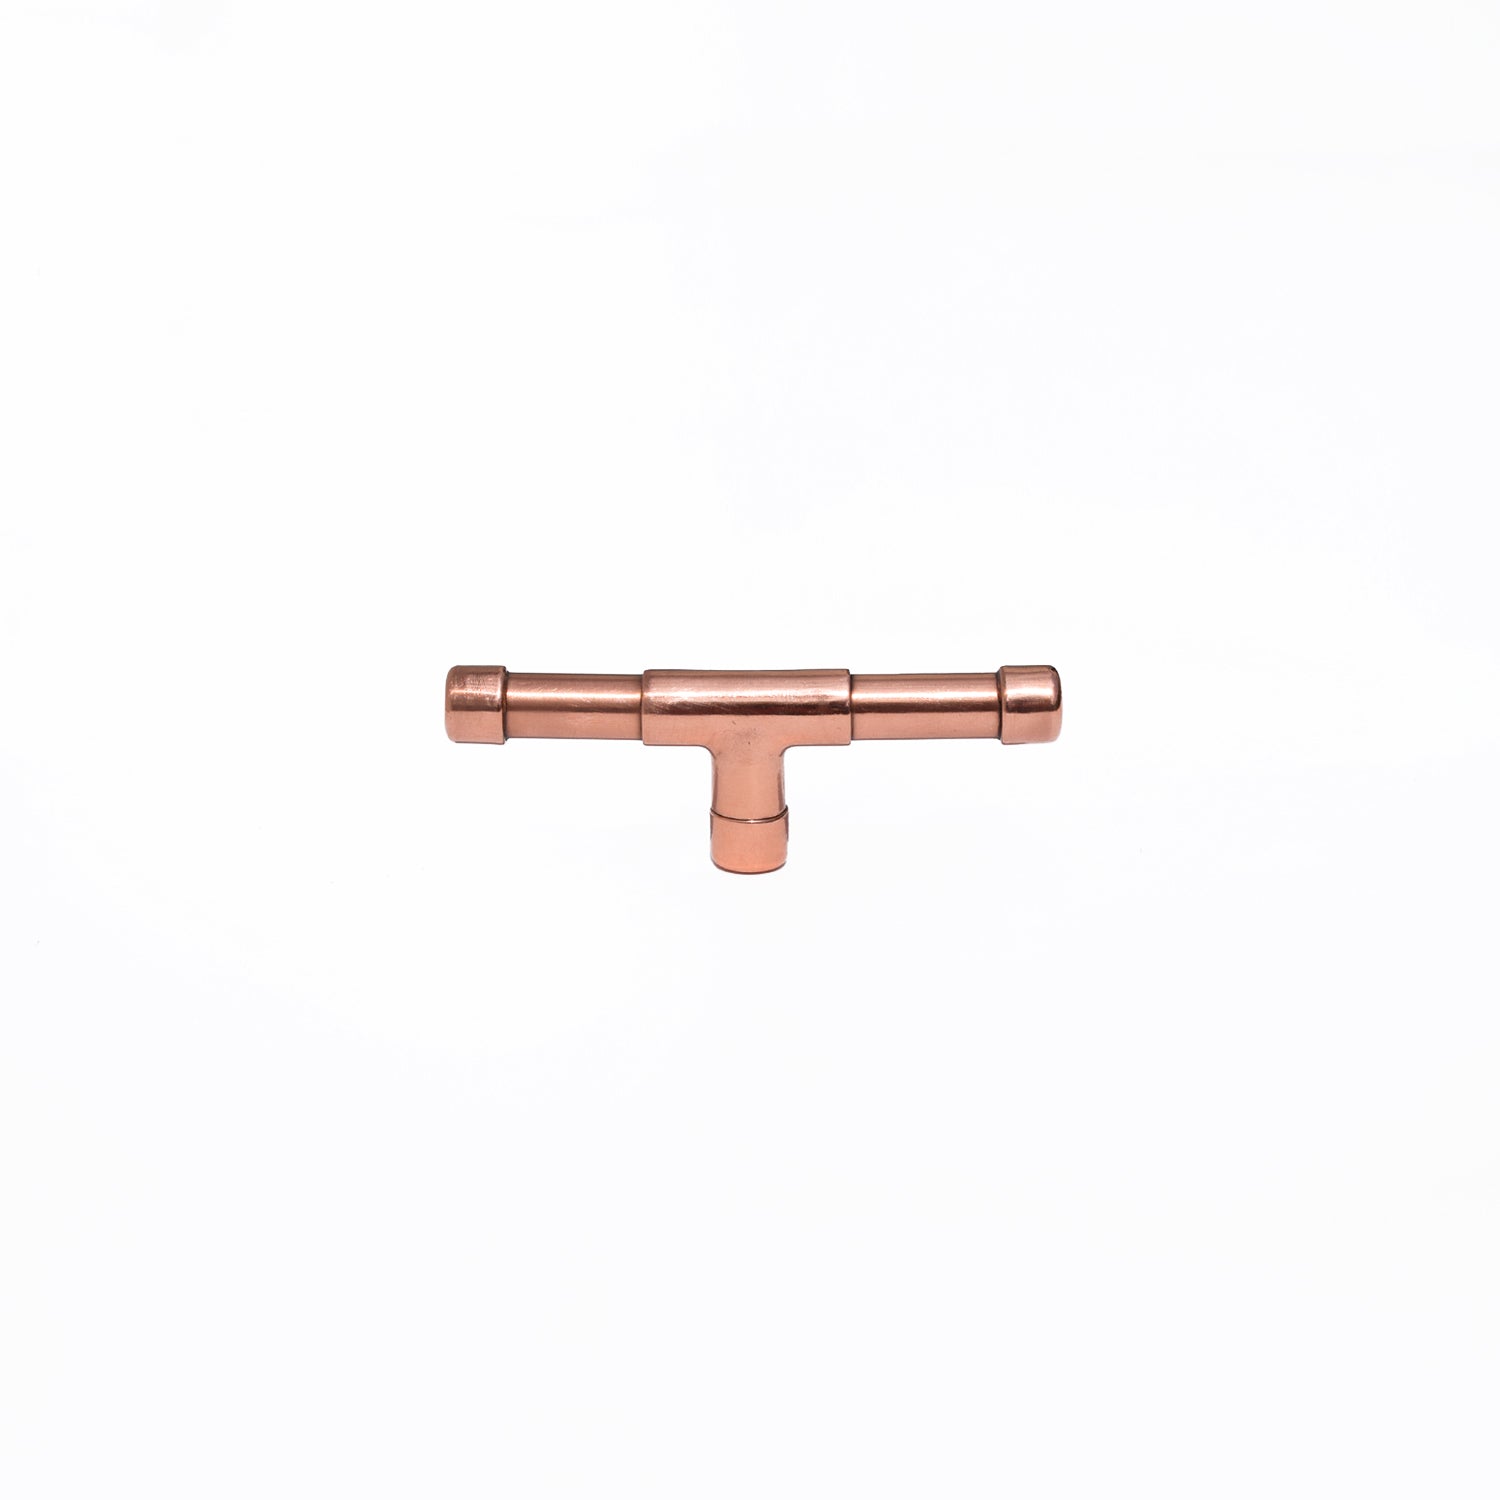 Solid Copper Knob (Mini) Extended T-shape - White Blank Background